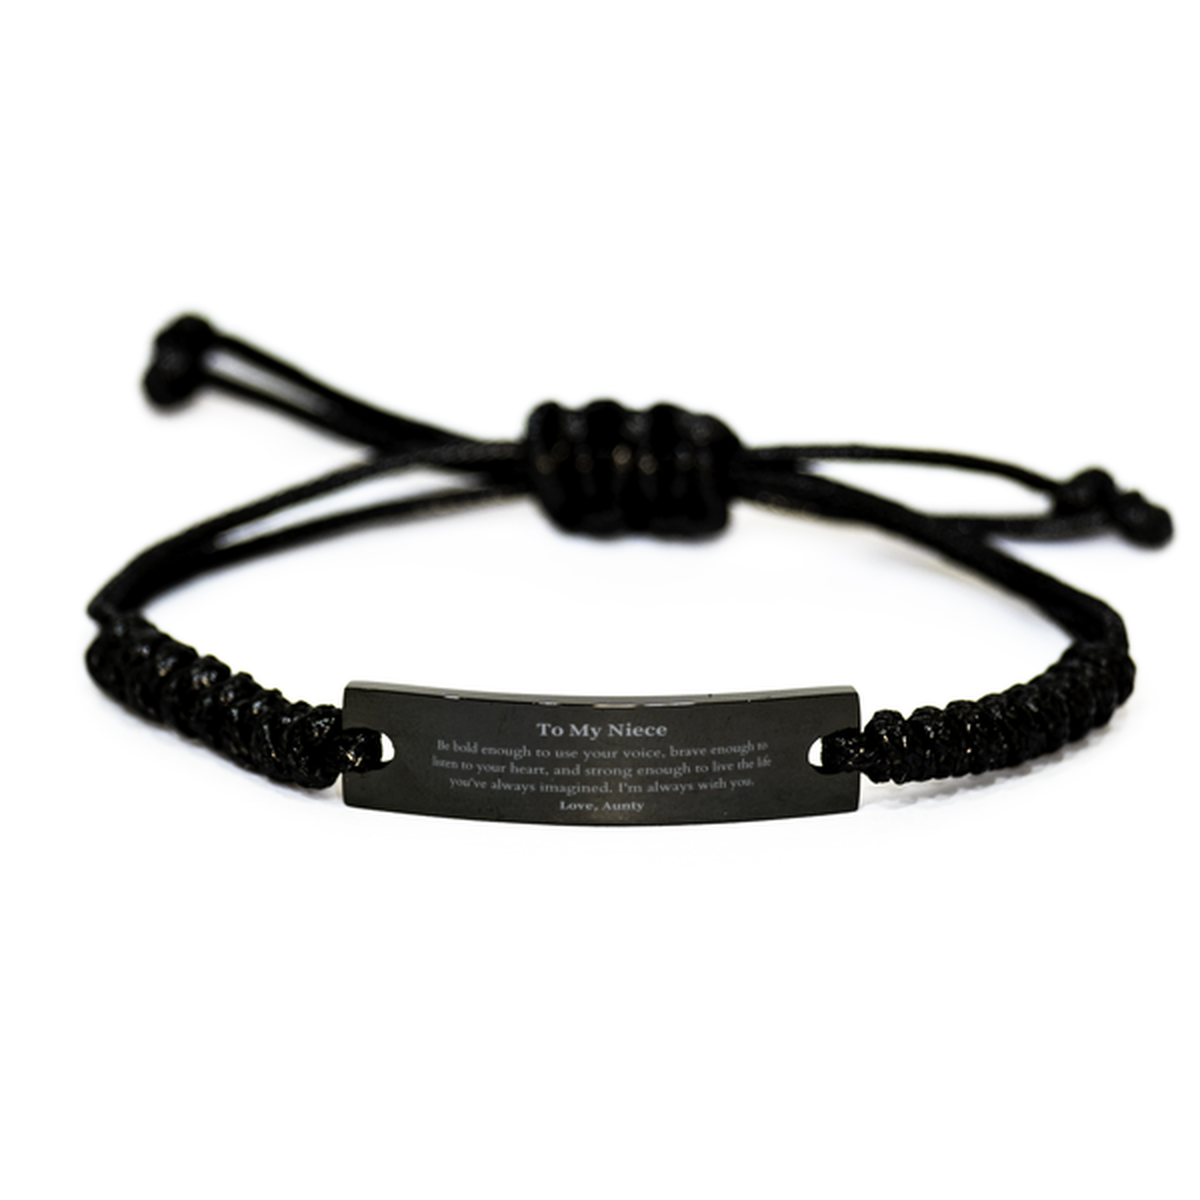 Keepsake Niece Black Rope Bracelet Gift Idea Graduation Christmas Birthday Niece from Aunty, Niece Be bold enough to use your voice, brave enough to listen to your heart. Love, Aunty